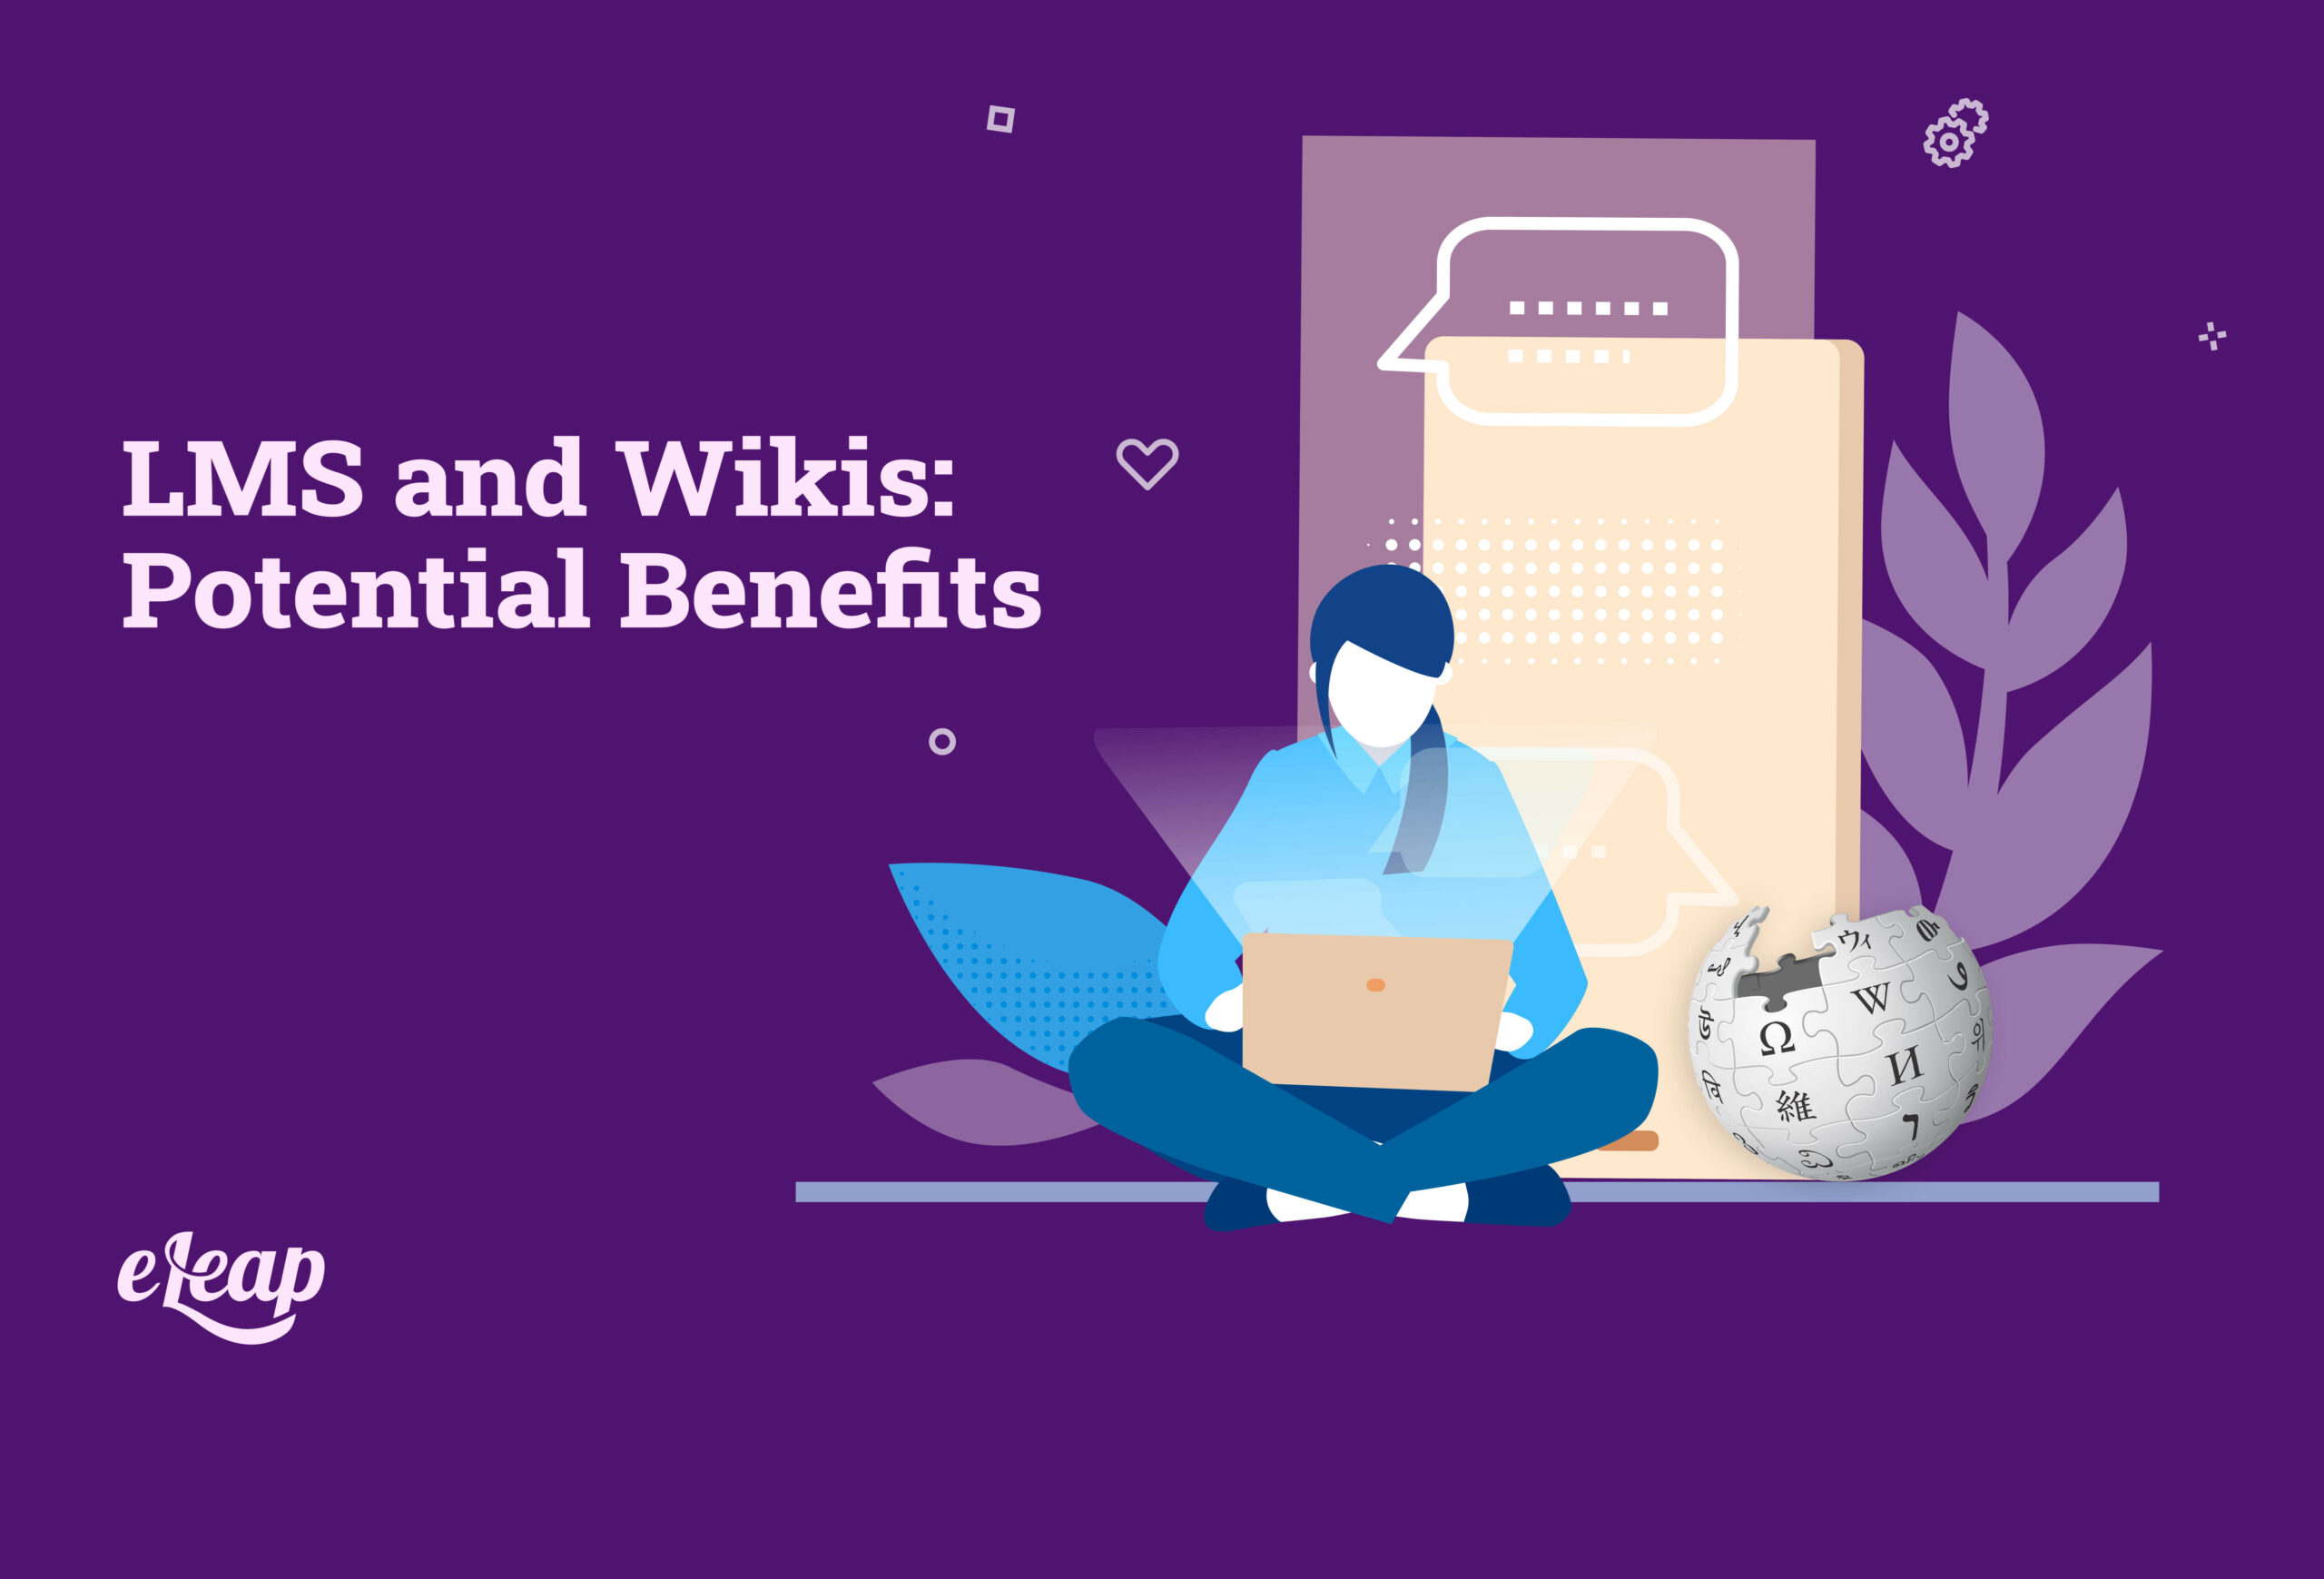 LMS and Wikis: Potential Benefits